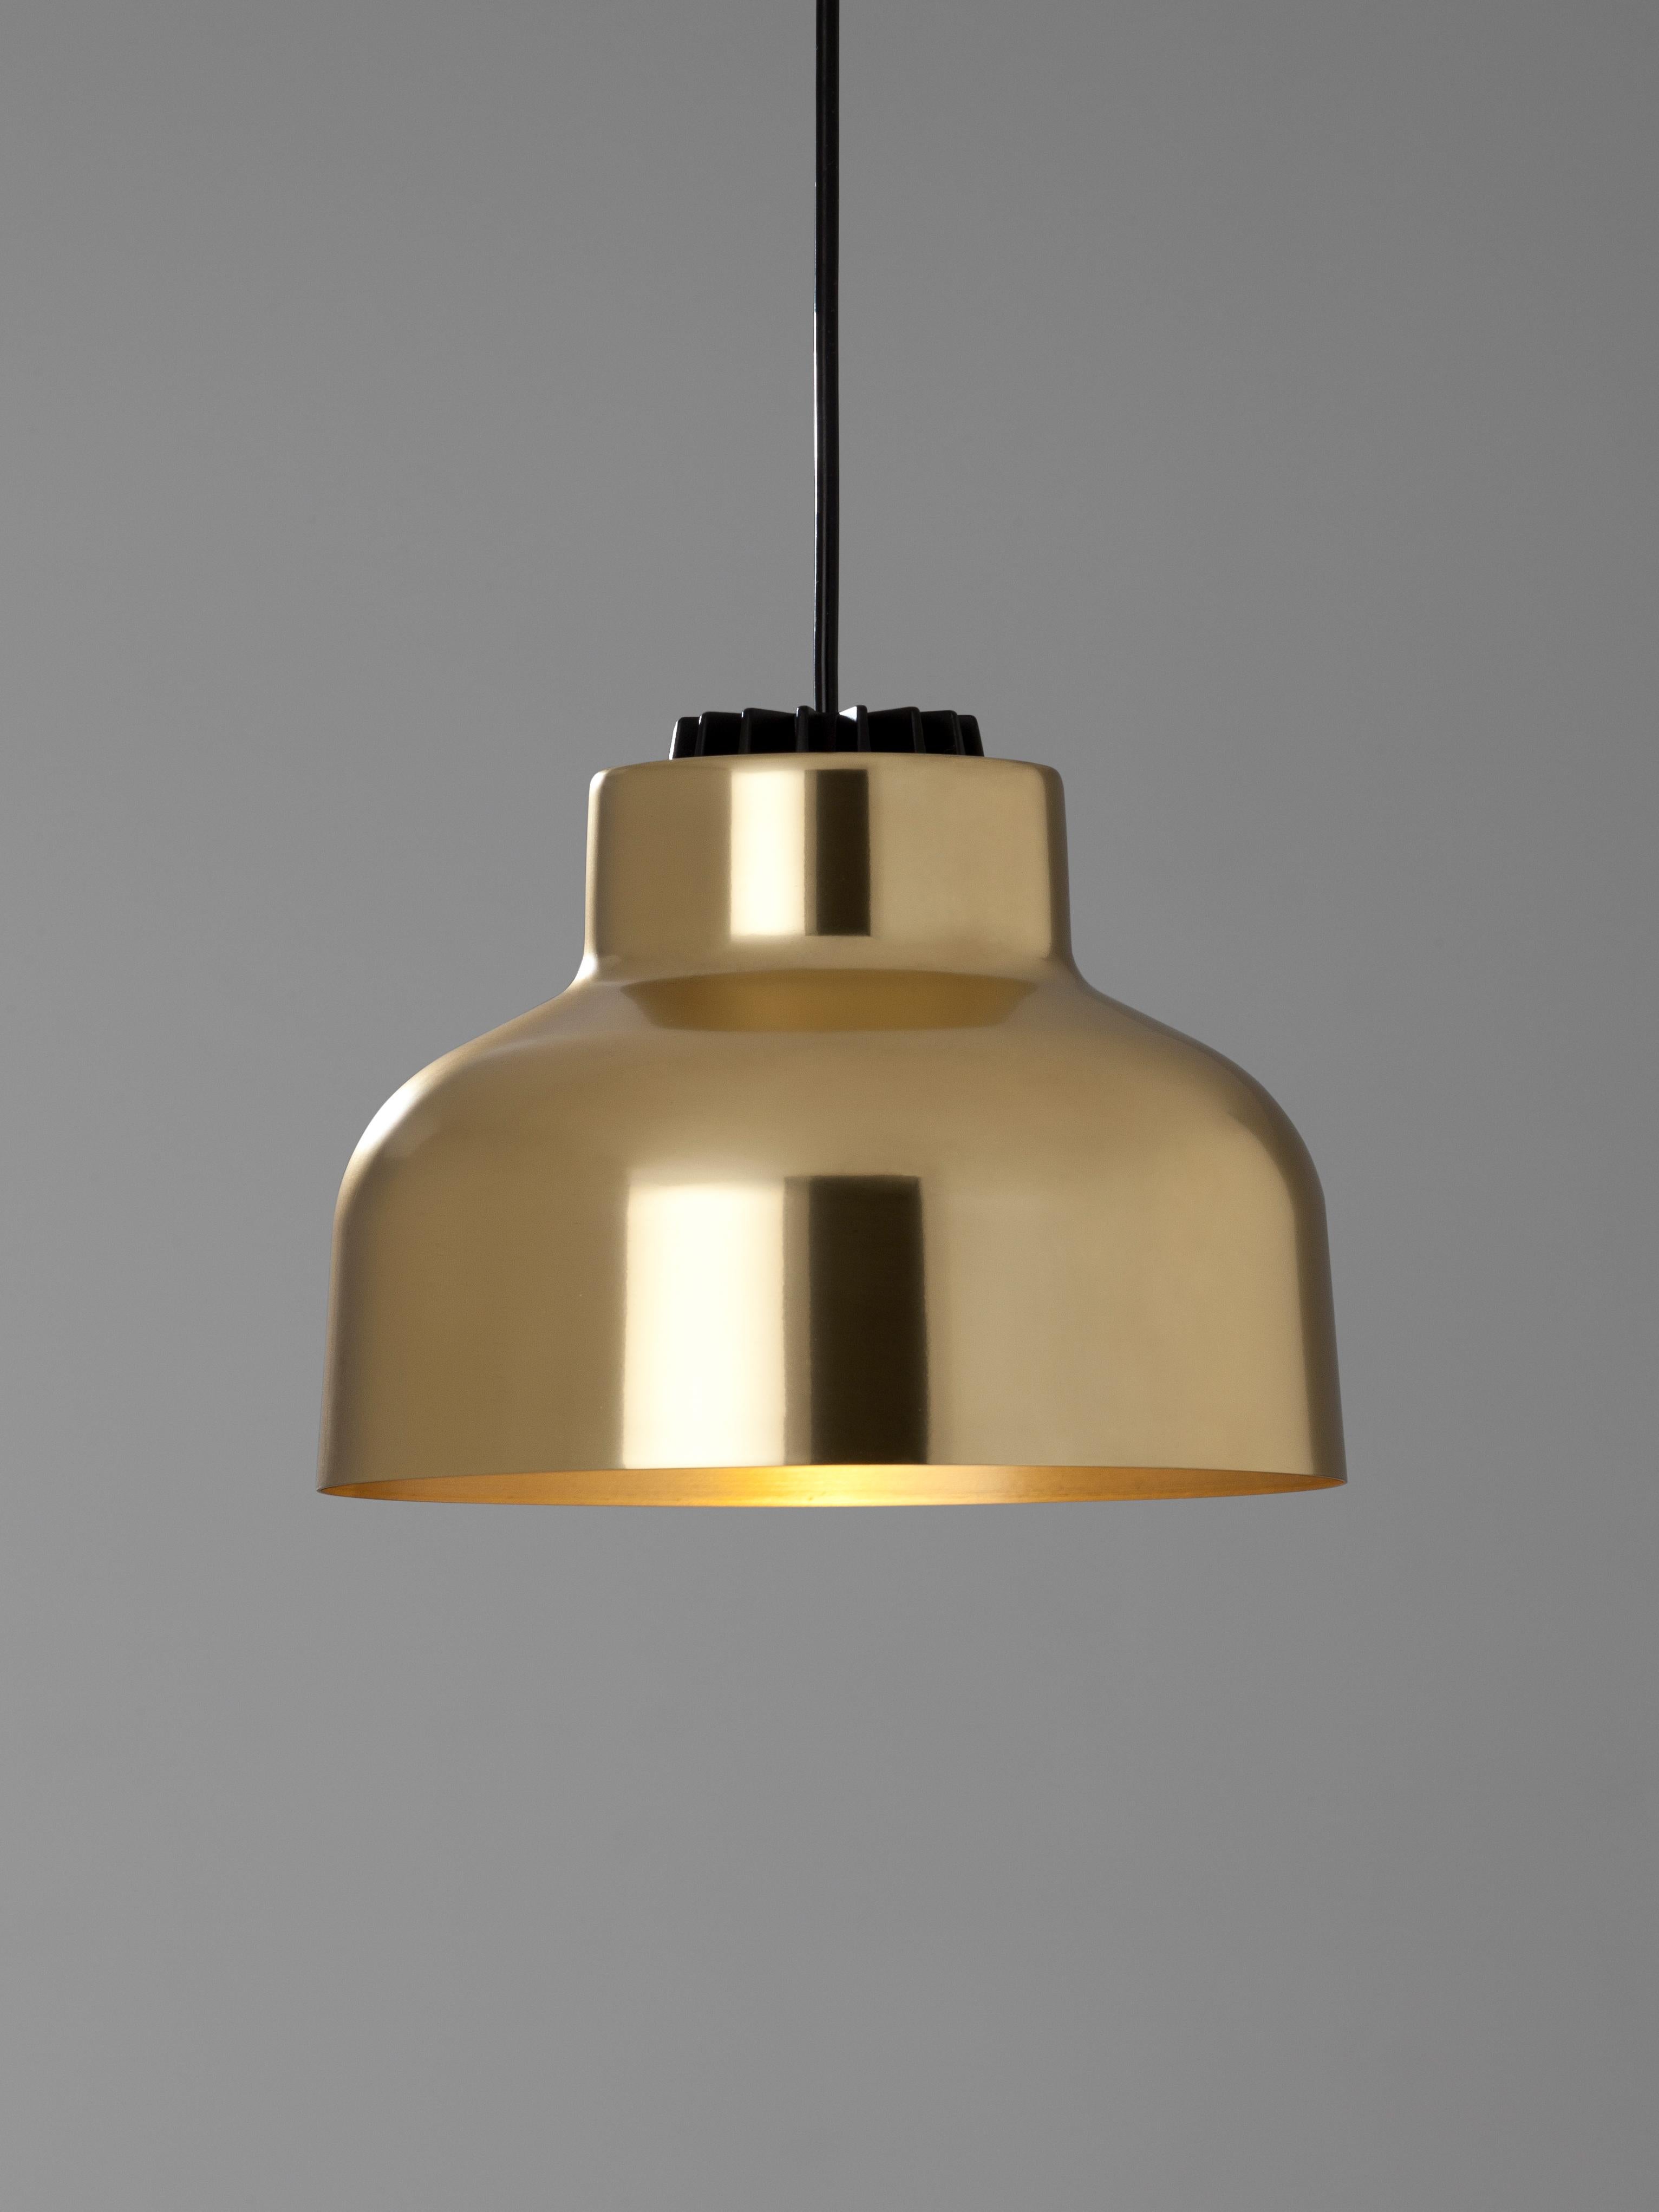 Brass M64 pendant lamp by Miguel Mila.
Dimensions: D 22 x H 16 cm.
Materials: Aluminum, plastic.
Cable lenght: 3mts.
Available in other colors. Available in 2 cable lenghts: 3mts, 8mts.
Available in 2 canopy colors: white or black.

M64 is